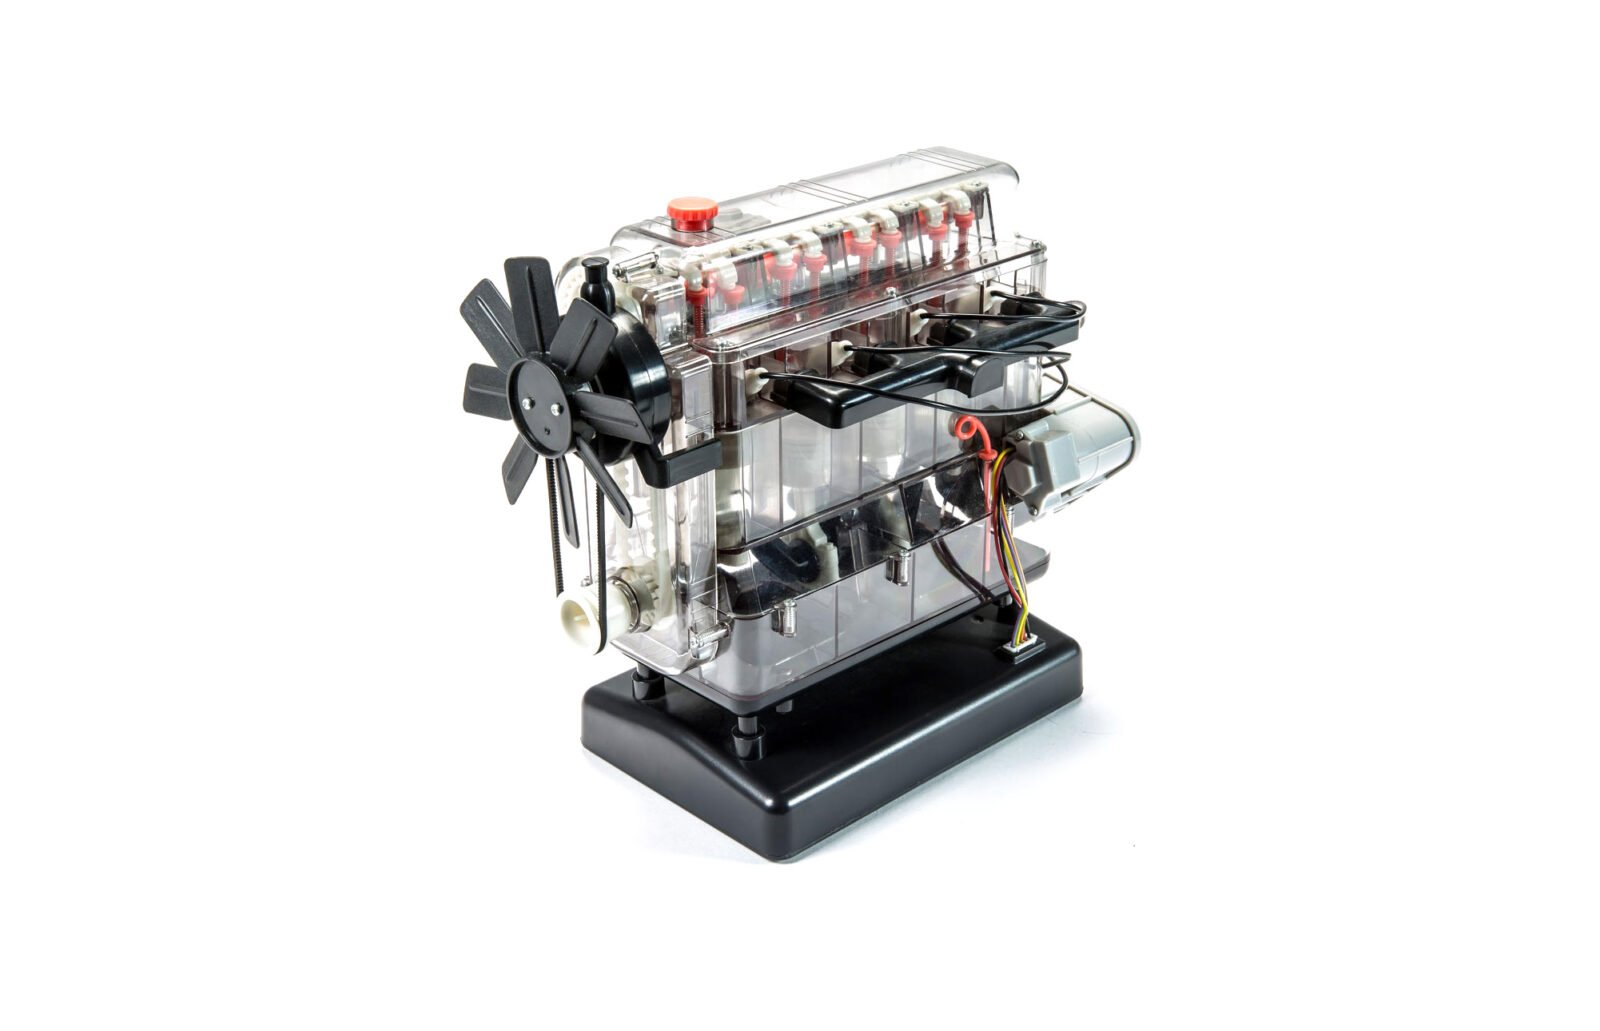 Airfix Combustion Engine Kit - A Transparent Working Engine Model